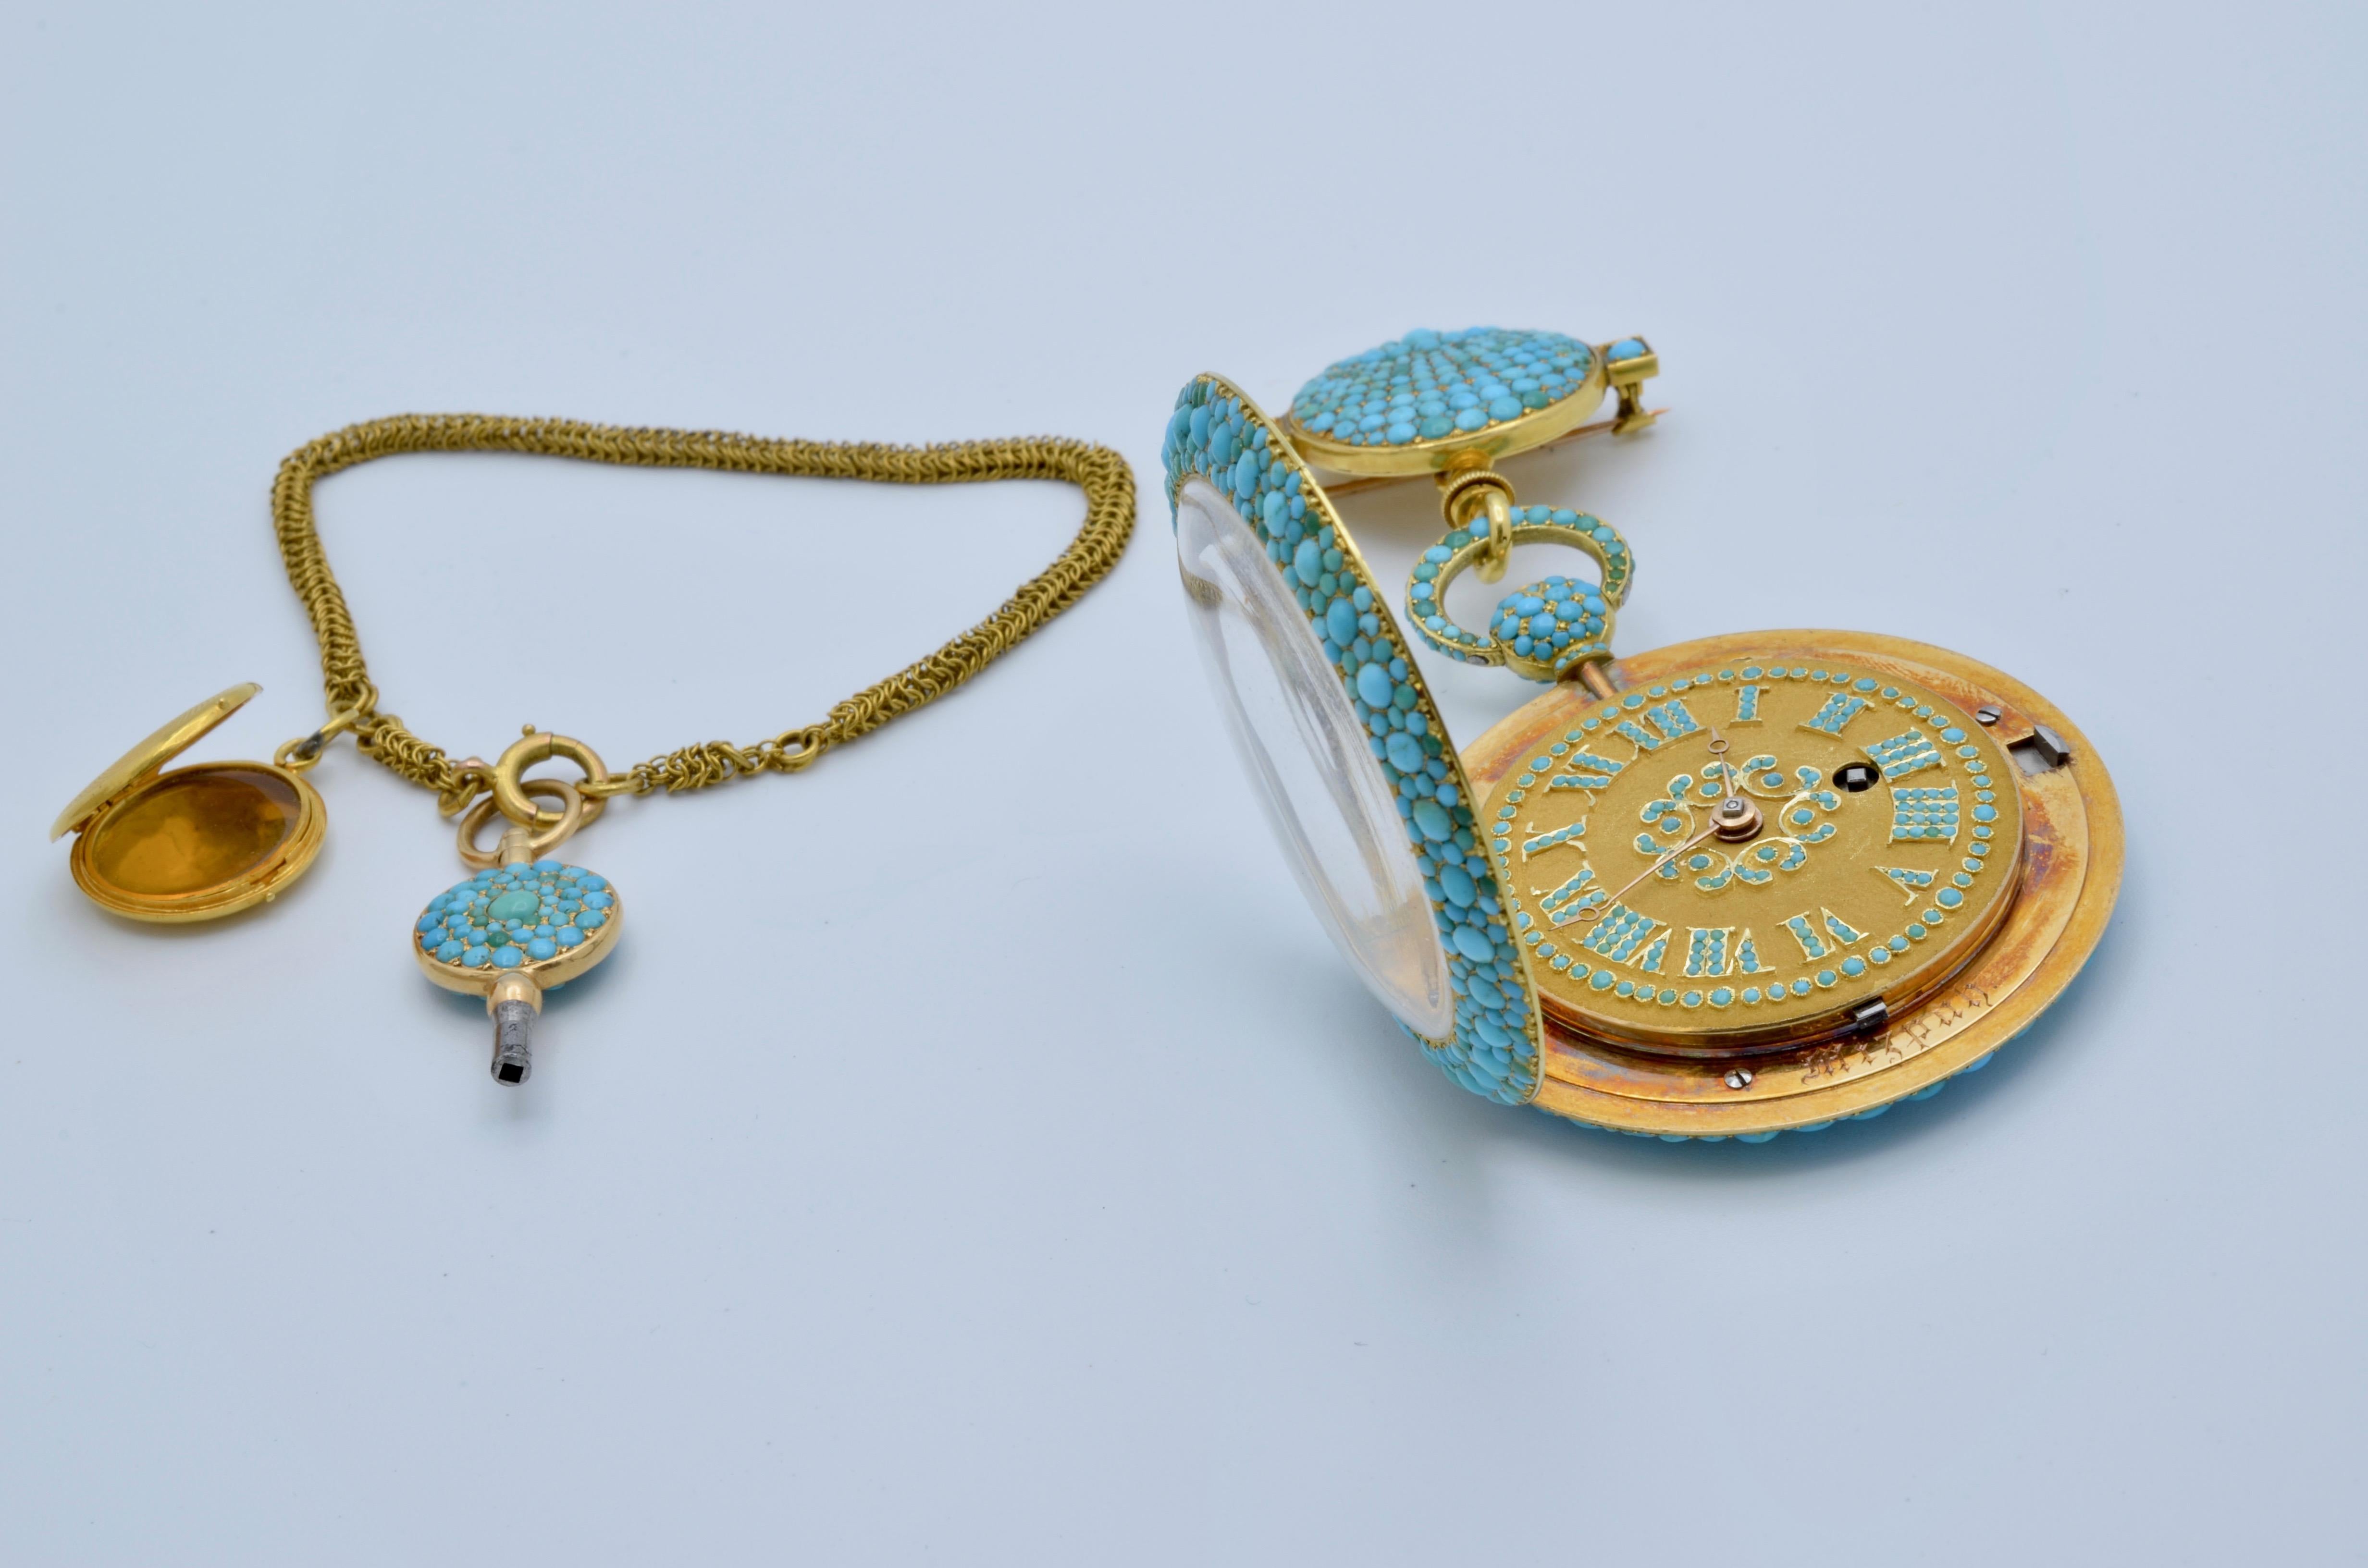 Edwardian 1830 Turquoise Lapel Gold Pocket Watch Bautte and Co with Chain and Locket